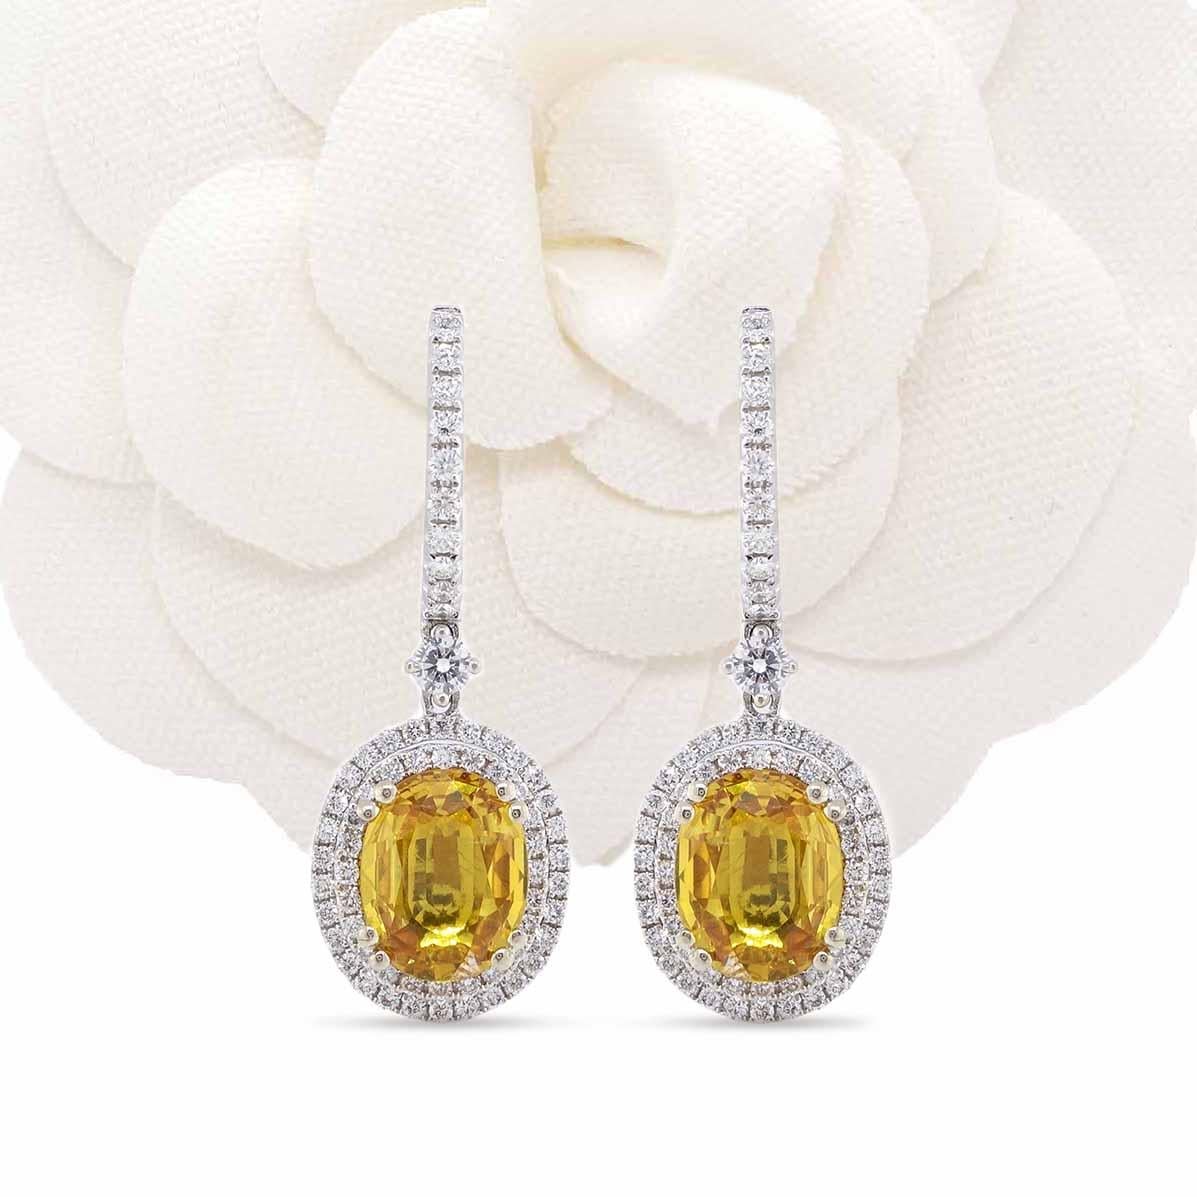 Brilliant Cut Yellow Oval Sapphires Earrings in 18k White Gold For Sale